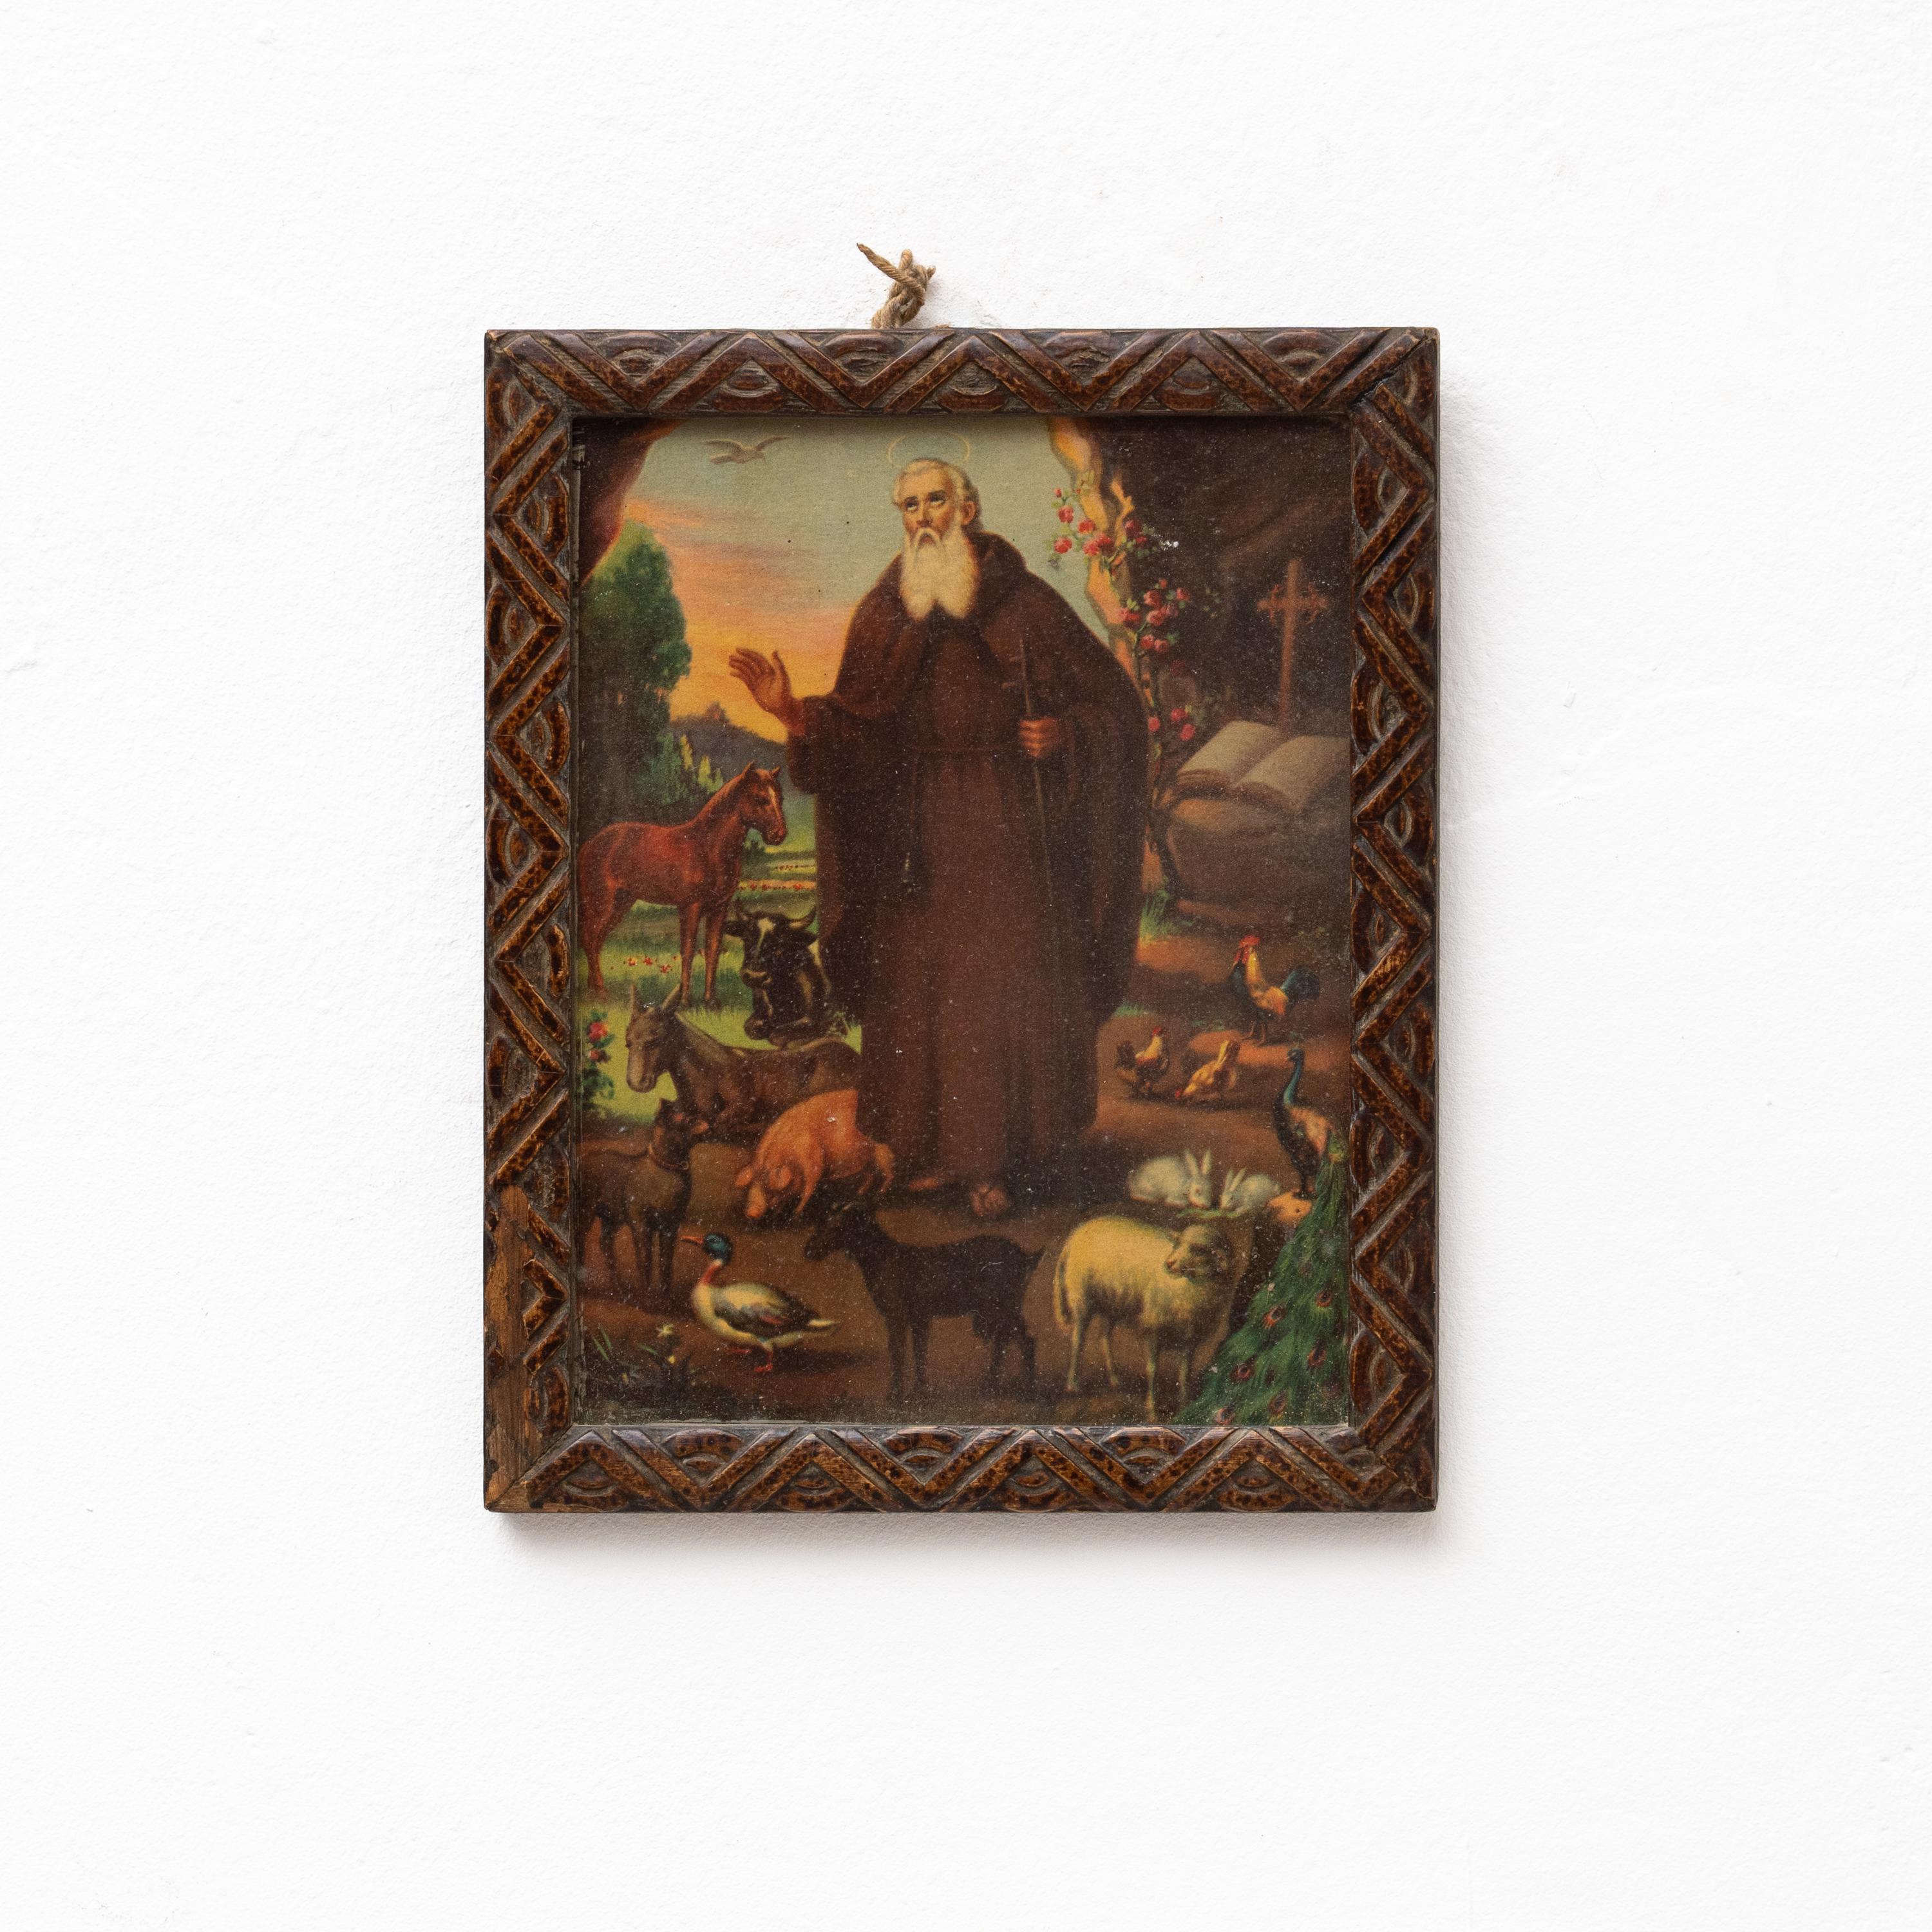 Framed Print of Saint Anthony.

By unknown artist, circa 1940.

In original condition, with some visible signs of previous use and age, preserving a beautiful patina.

Materials:
Painting.
Wood.